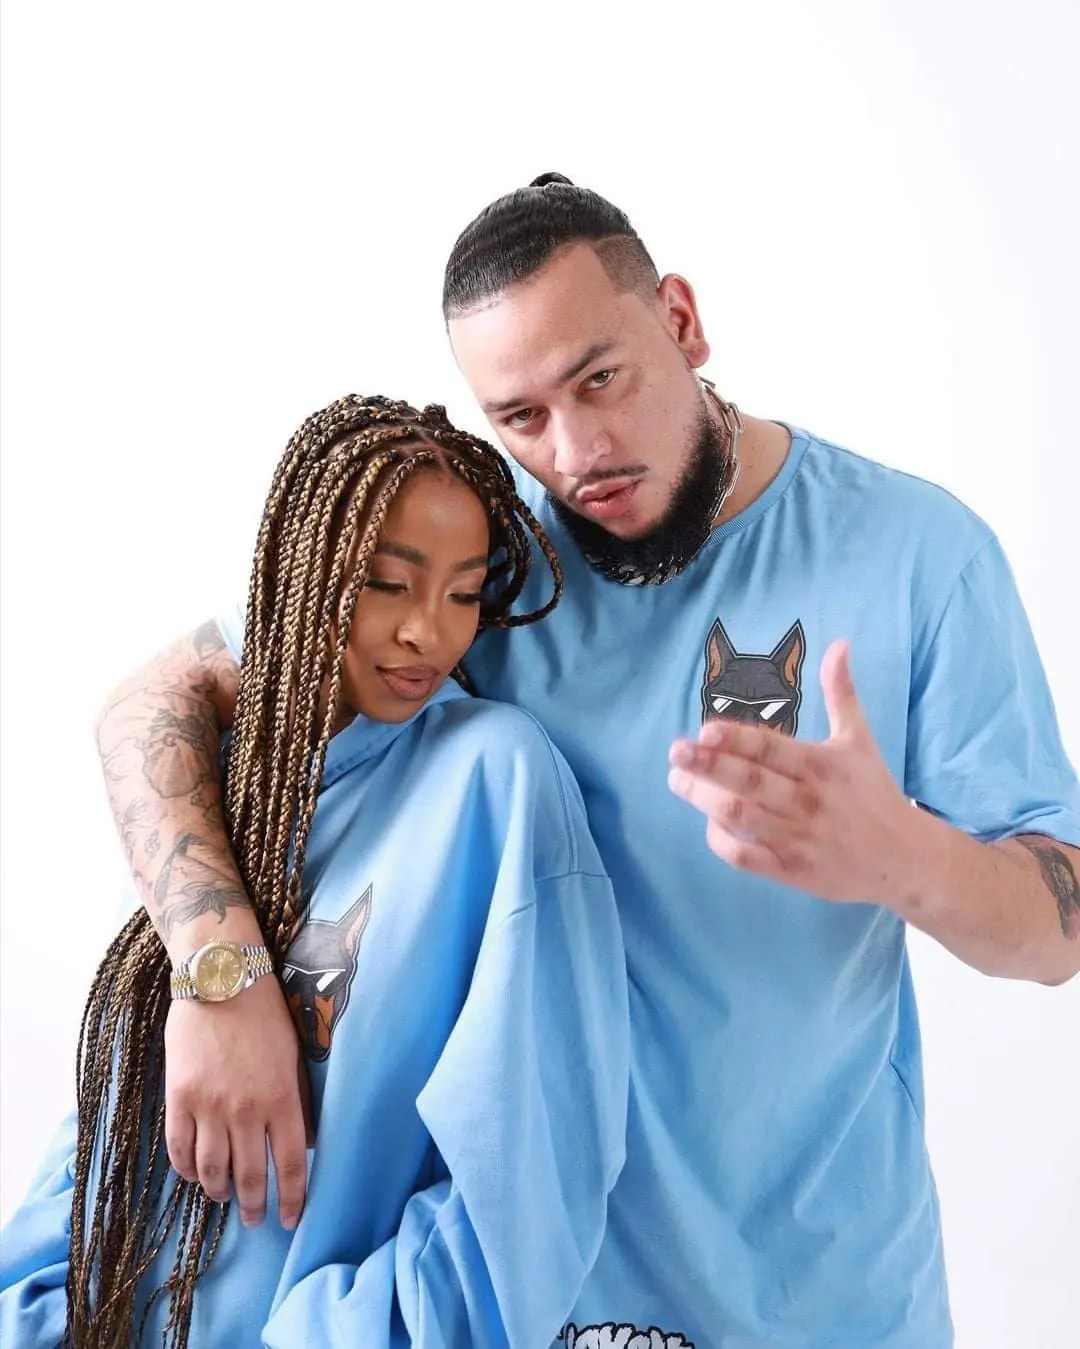 8 months later: AKA shares romantic video with late Nelli Tembe (WATCH)